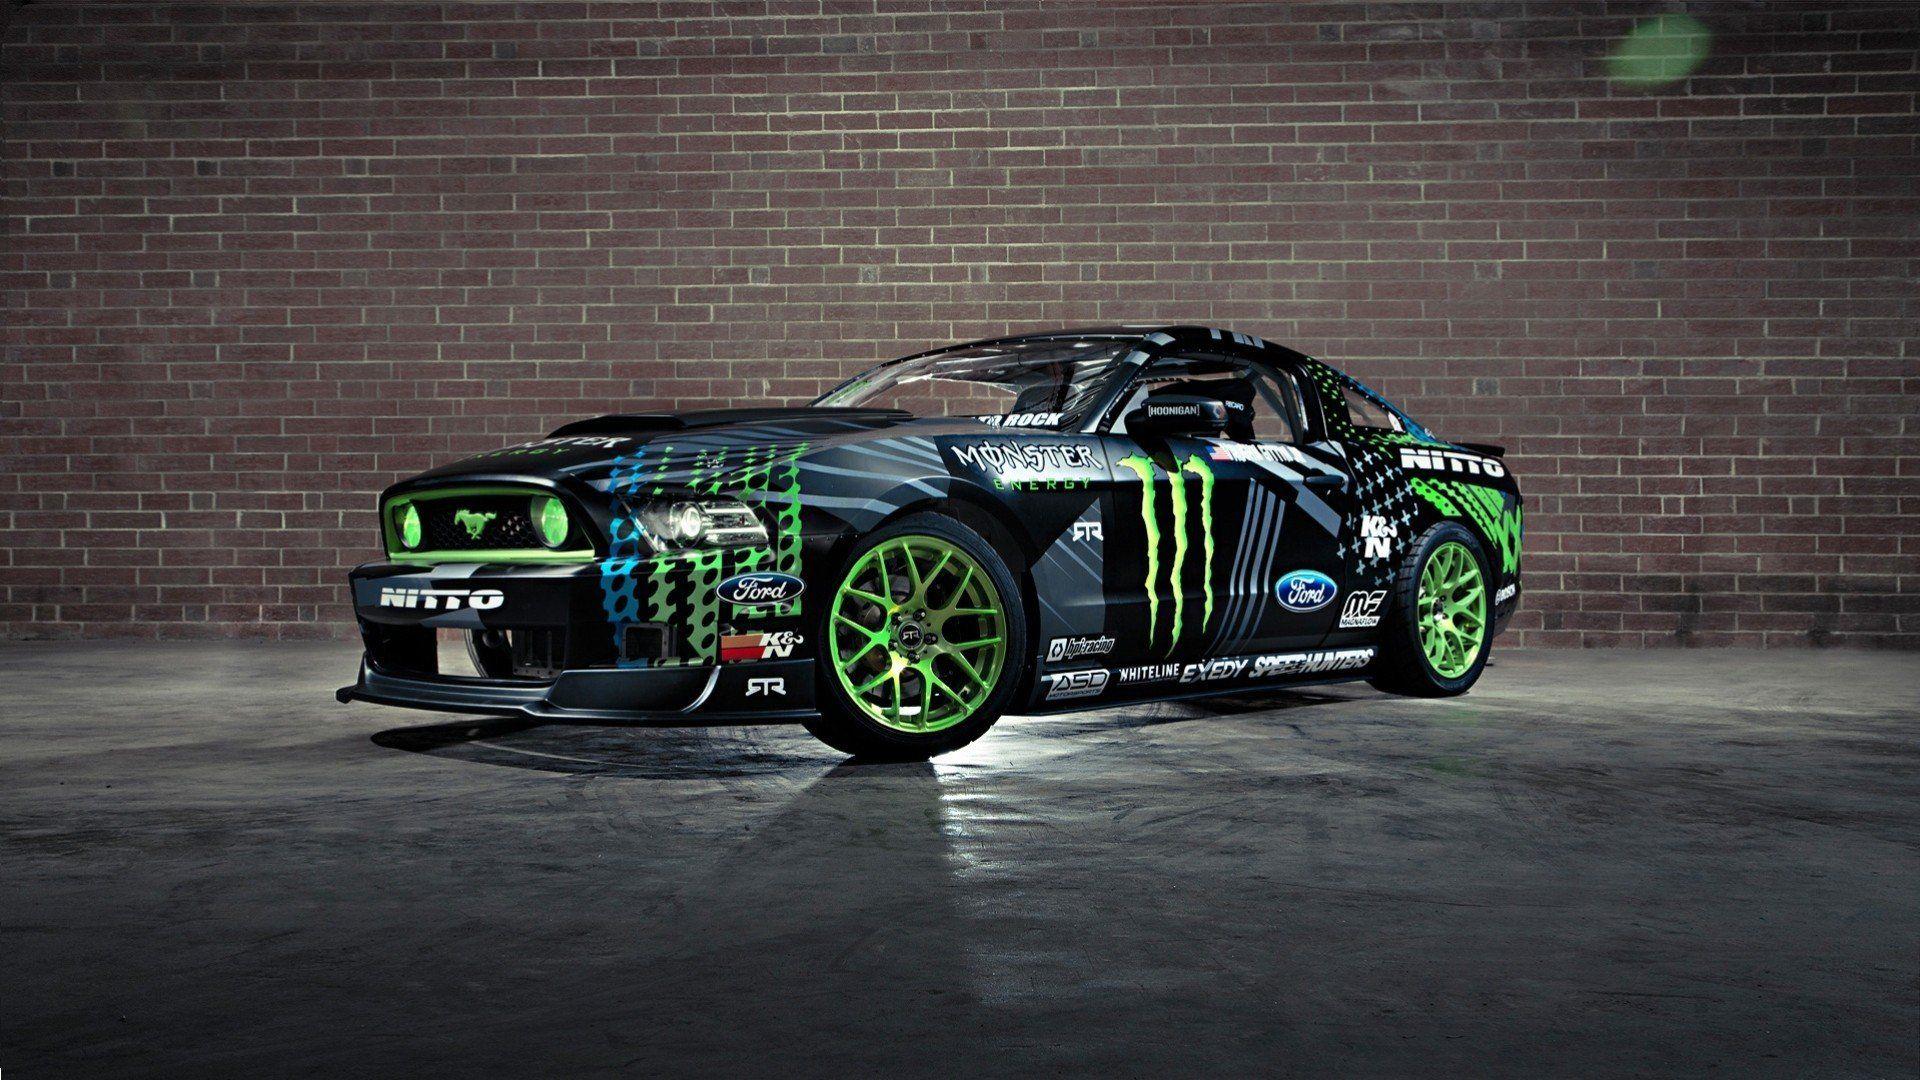 Awesome Monster Energy Car HD Wallpaper High Resolution Mpetition